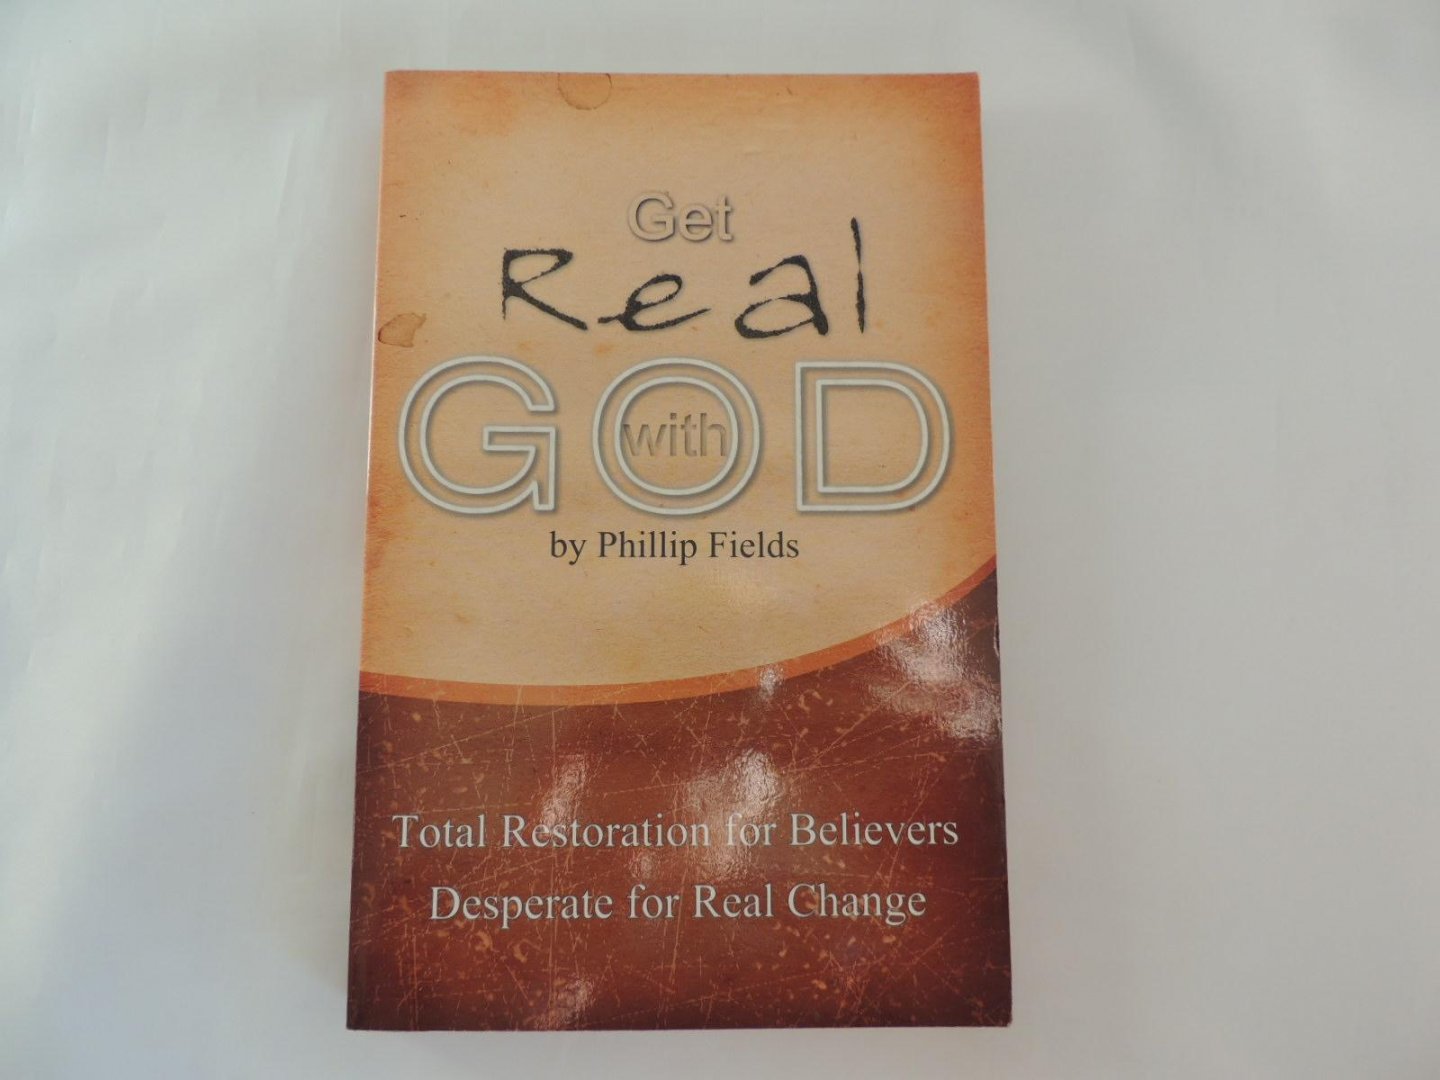 Fields Phillip - Get Real With God - Total Restoration for Believers Desperate for Real Change